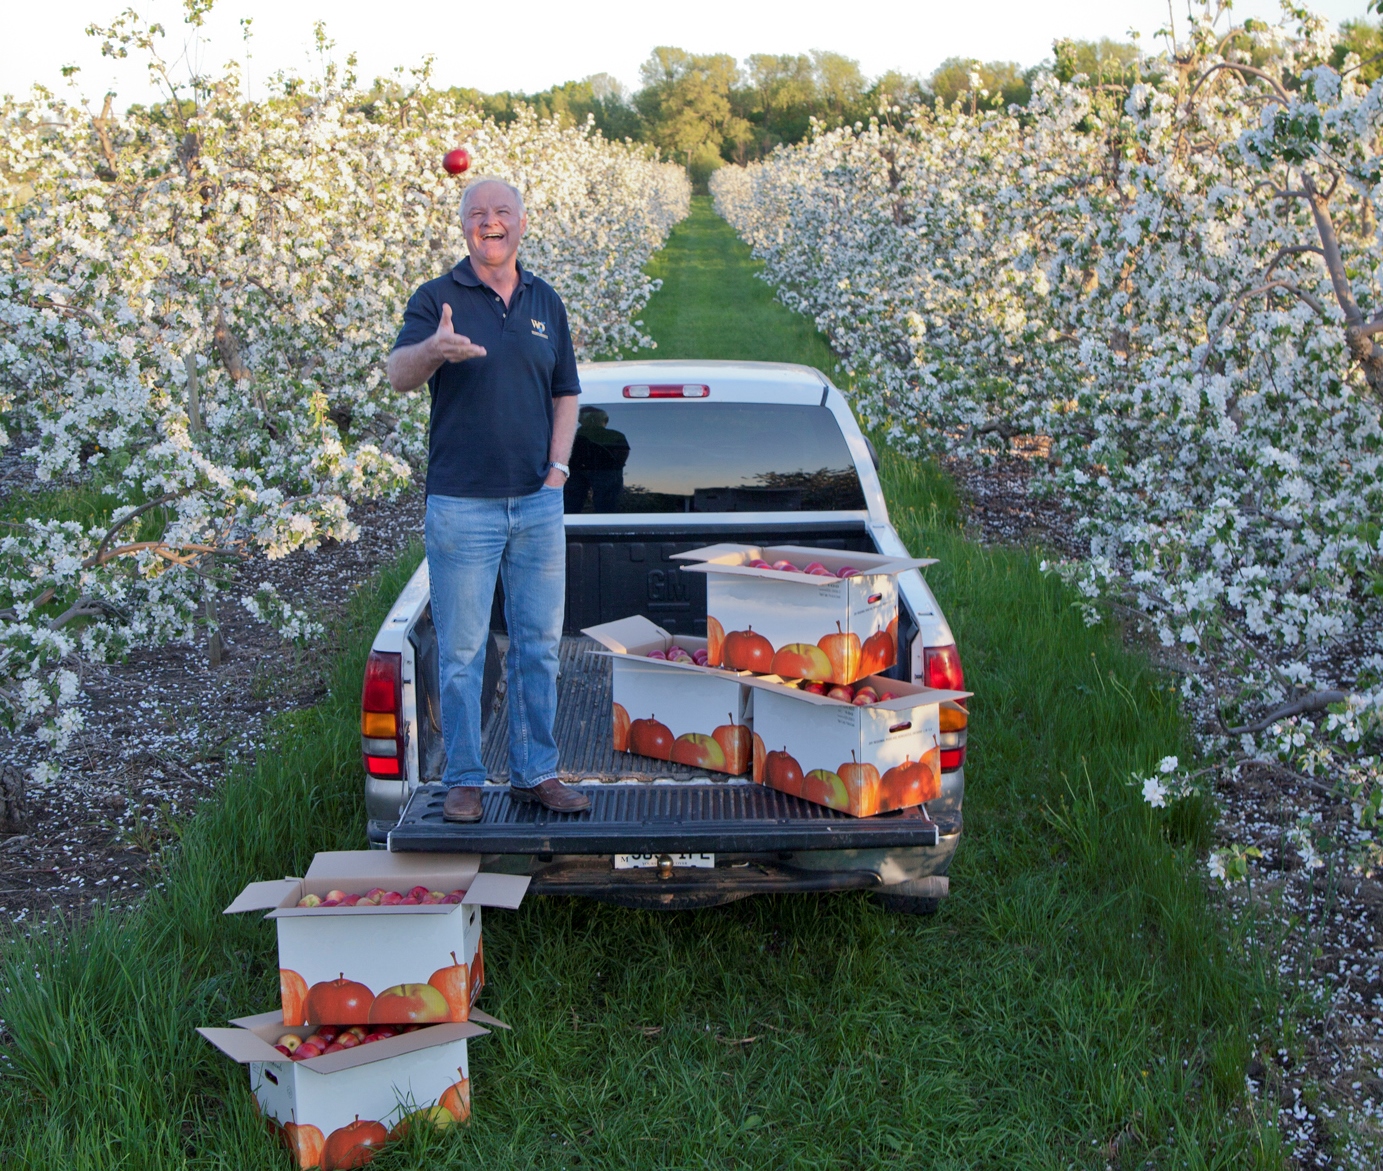 Charles Stevens in his apple orchard near Newcastle, Ontario